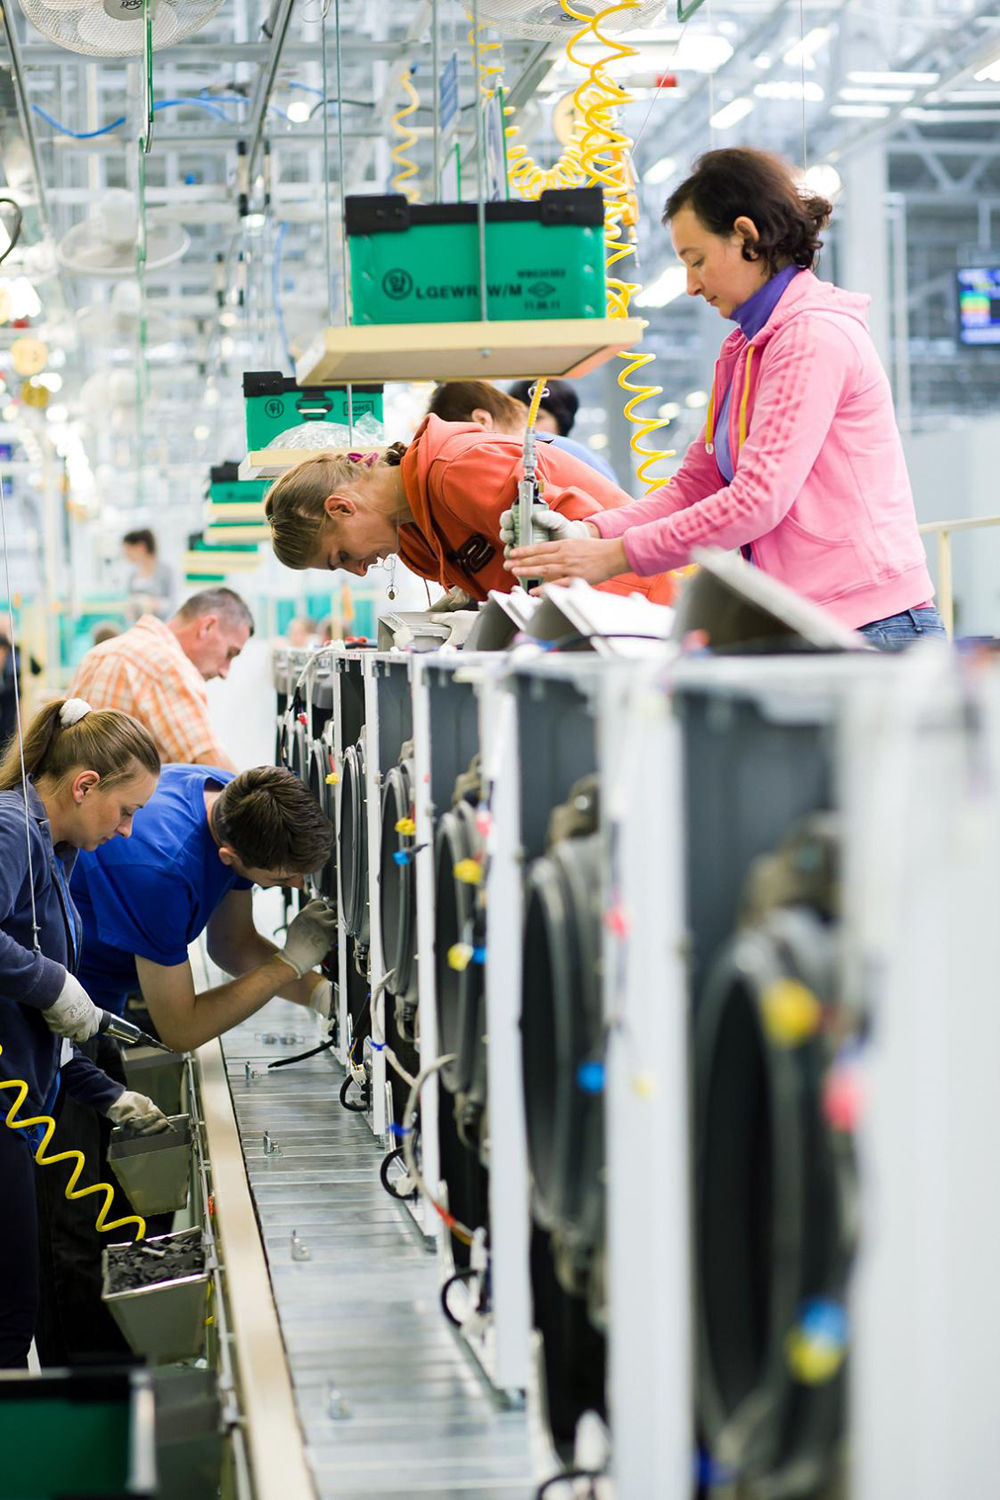 Many factory staff members assemble washing machines at an appliance manufacturing plant in Poland